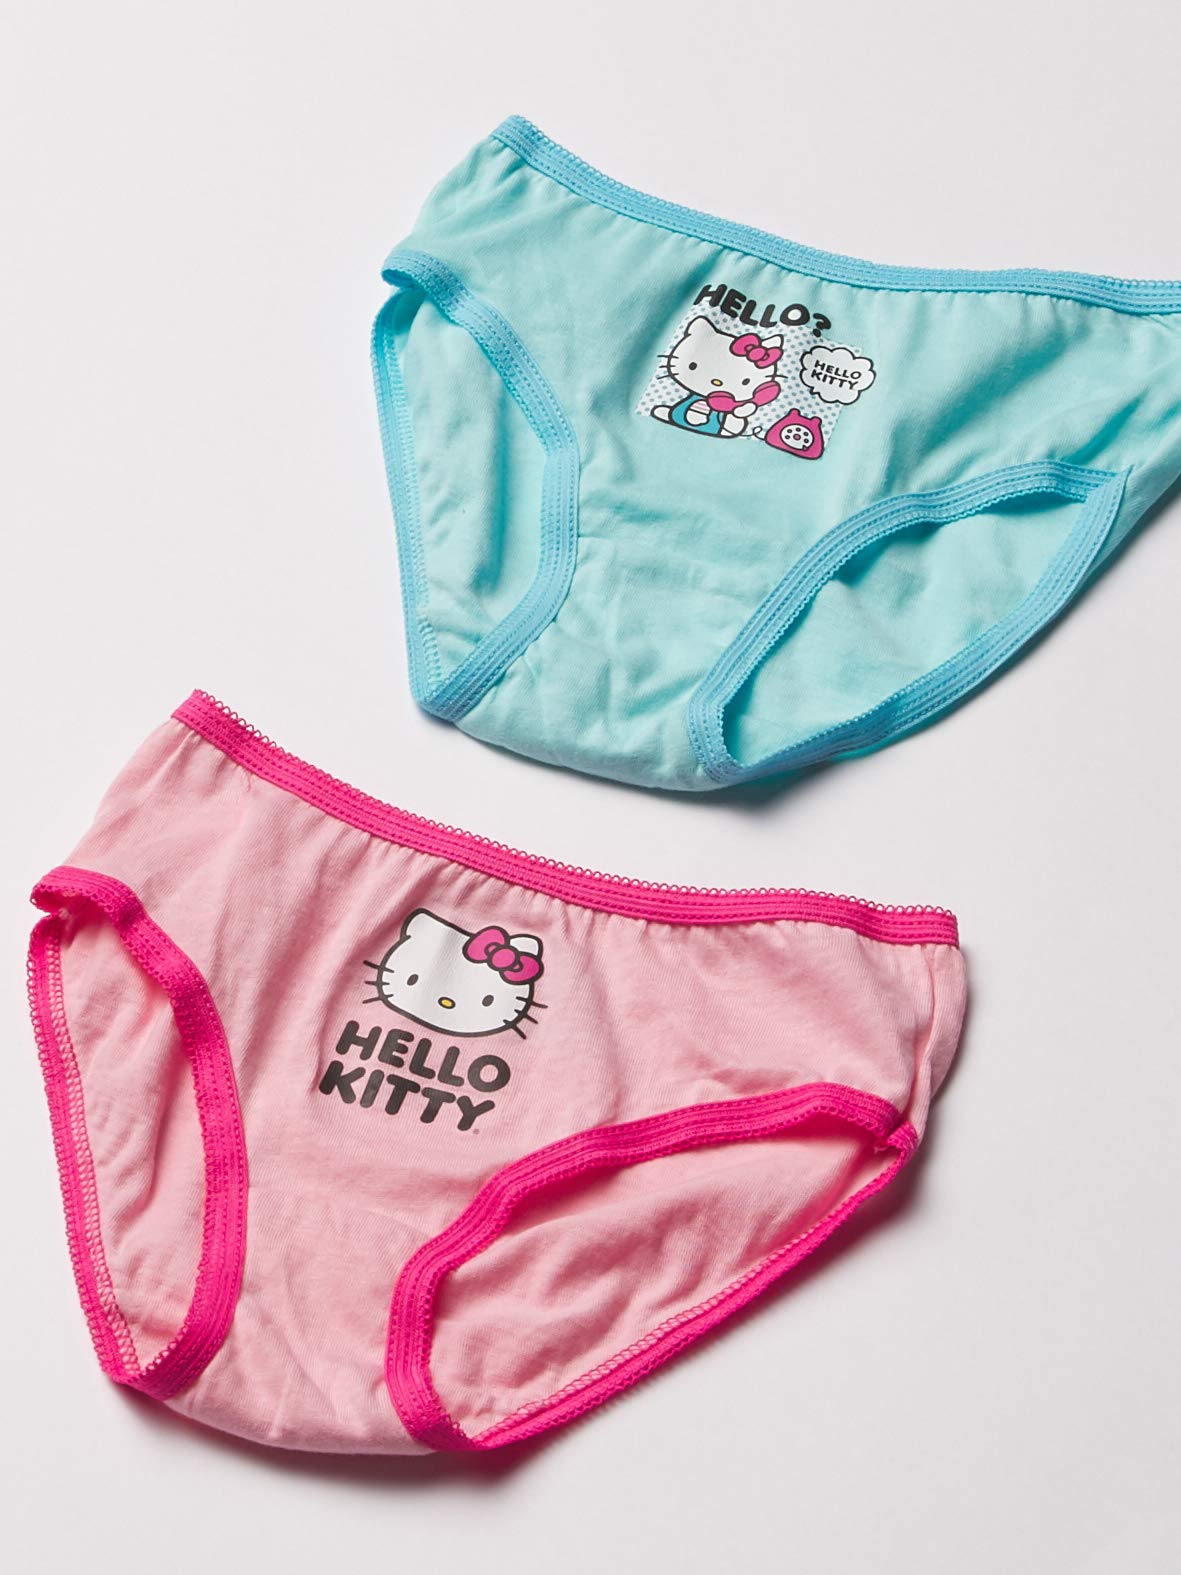 Hello Kitty Girls' 100% Combed Cotton Underwear 7pk and 10pk Panties in 2/3t, 4t, 4, 6 and 8